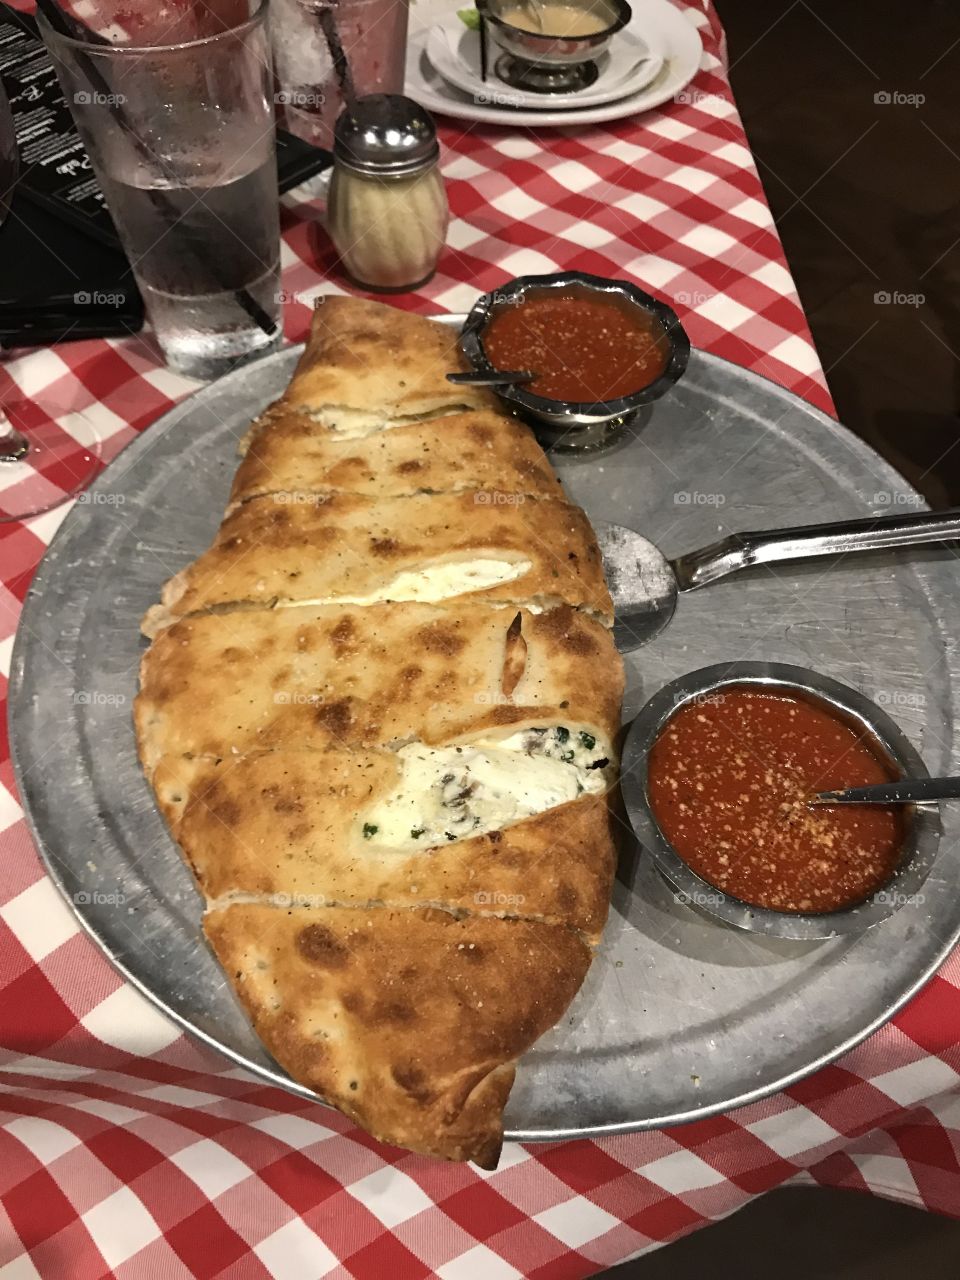 Calzone 16 inch 